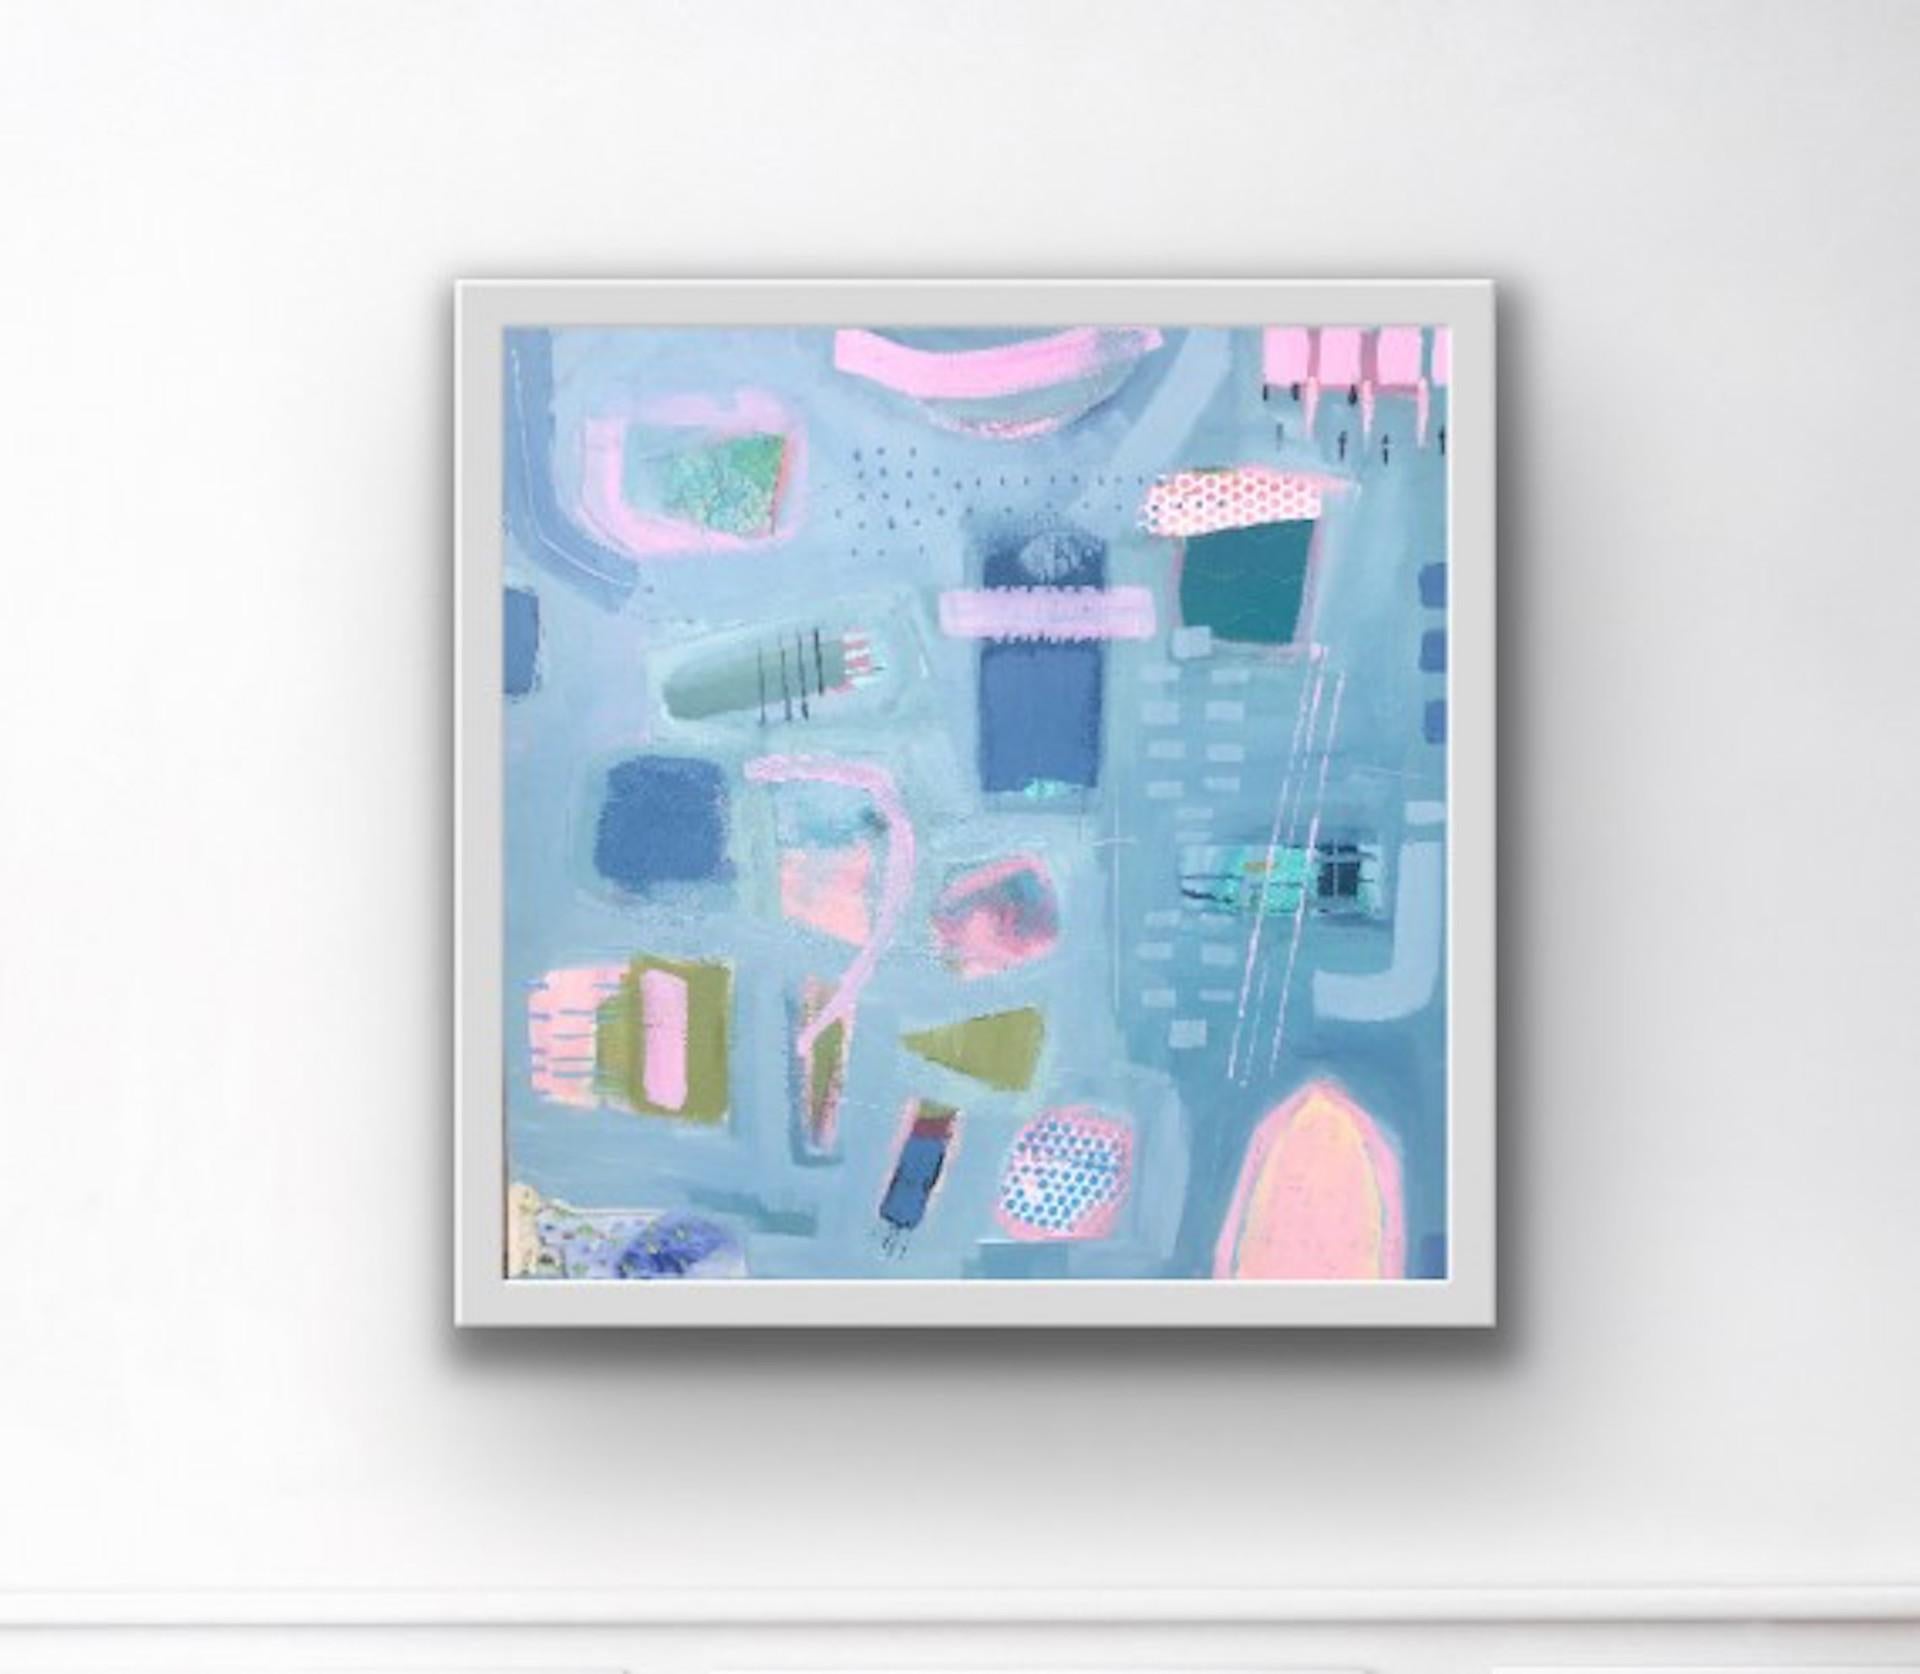 Maggie LaPorte Banks. Tiffany blue diamonds [2021]
original

Acrylic and collage on canvas

Image size: H:75 cm x W:75 cm

Complete Size of Unframed Work: H:75 cm x W:75 cm x D:1.5cm

Sold Unframed

Please note that insitu images are purely an